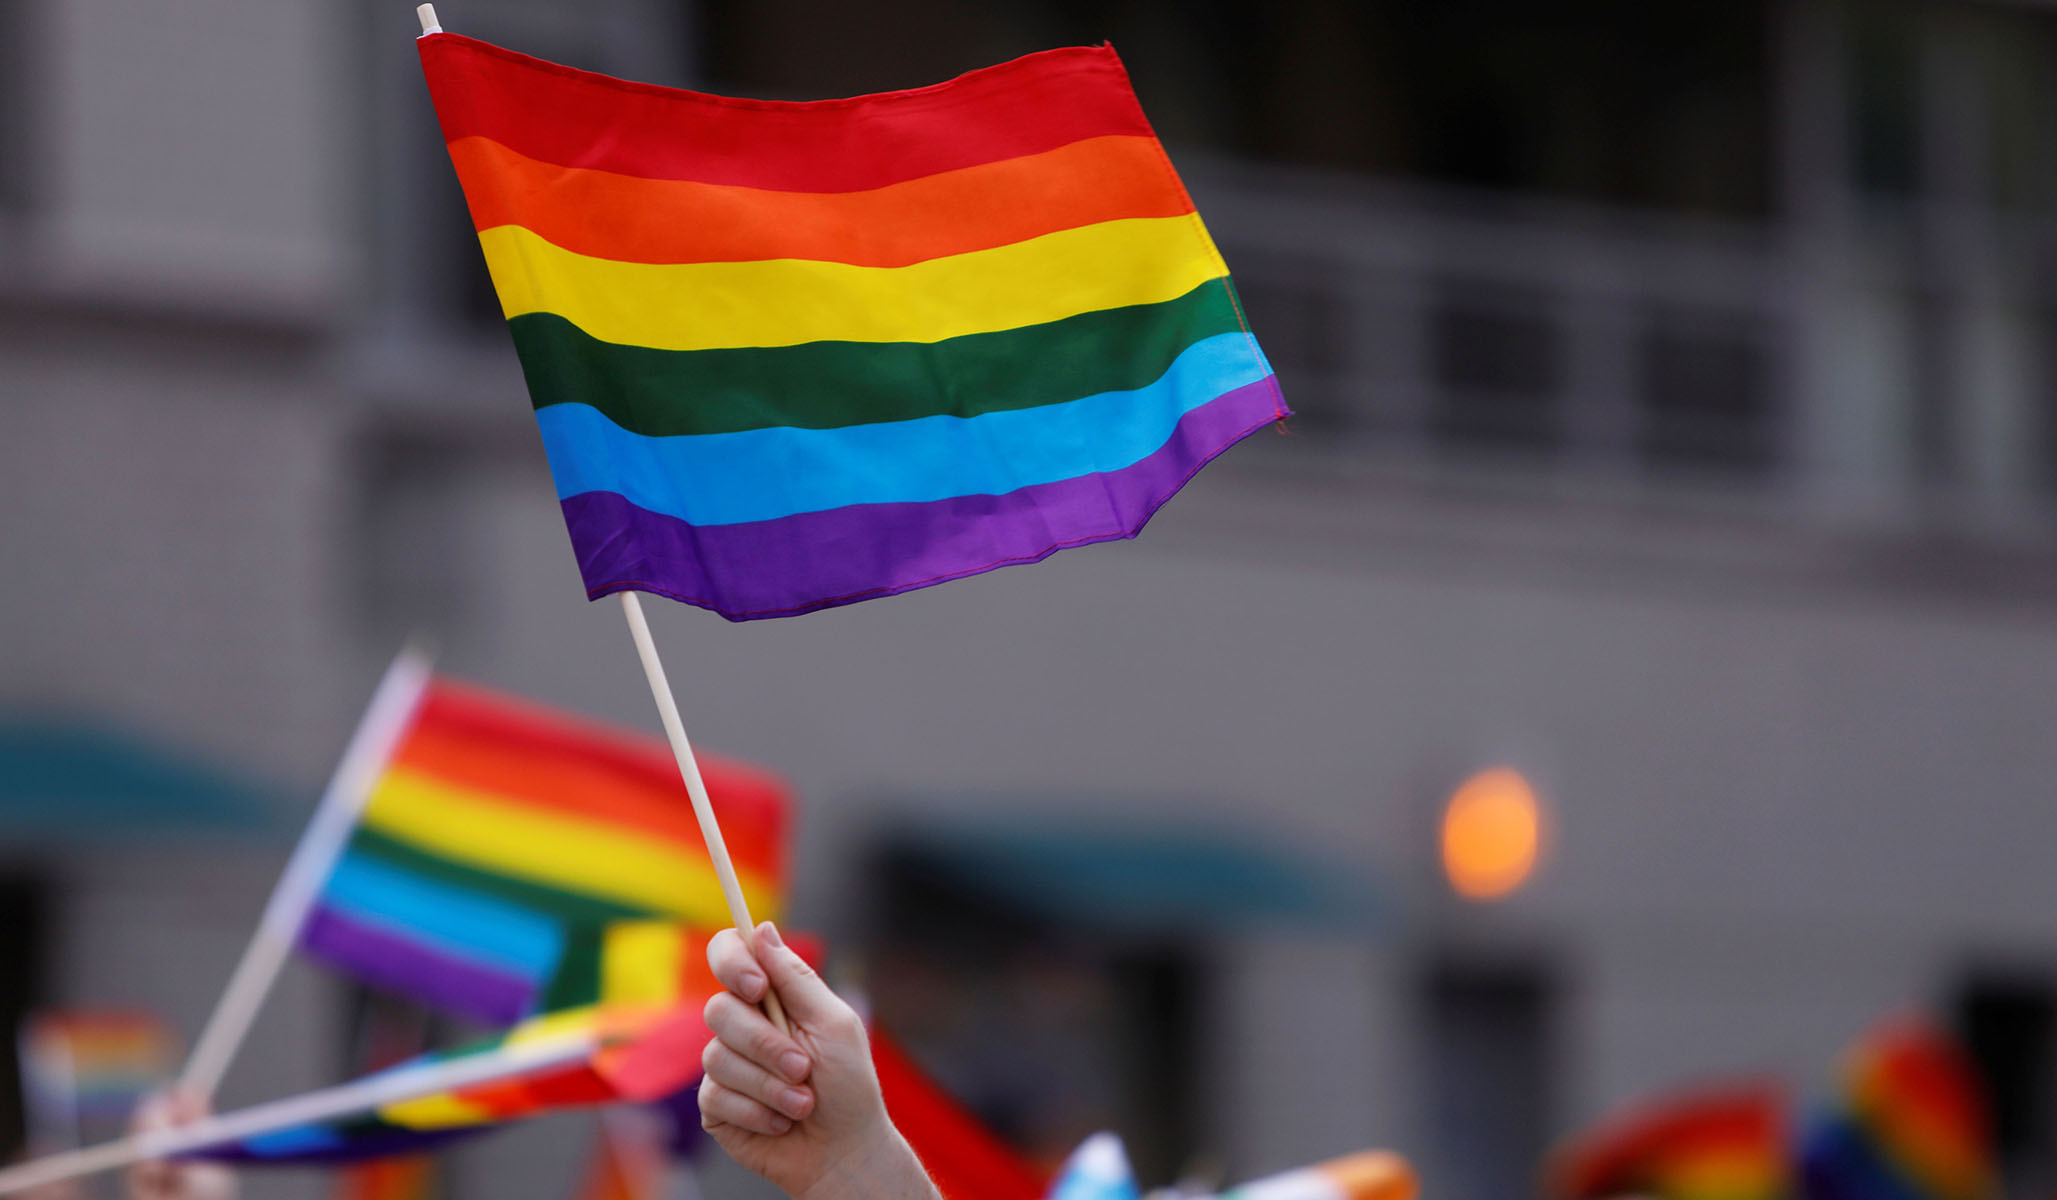 Minnesota School District Partners with Org Offering 'Pride Resources' for Toddlers